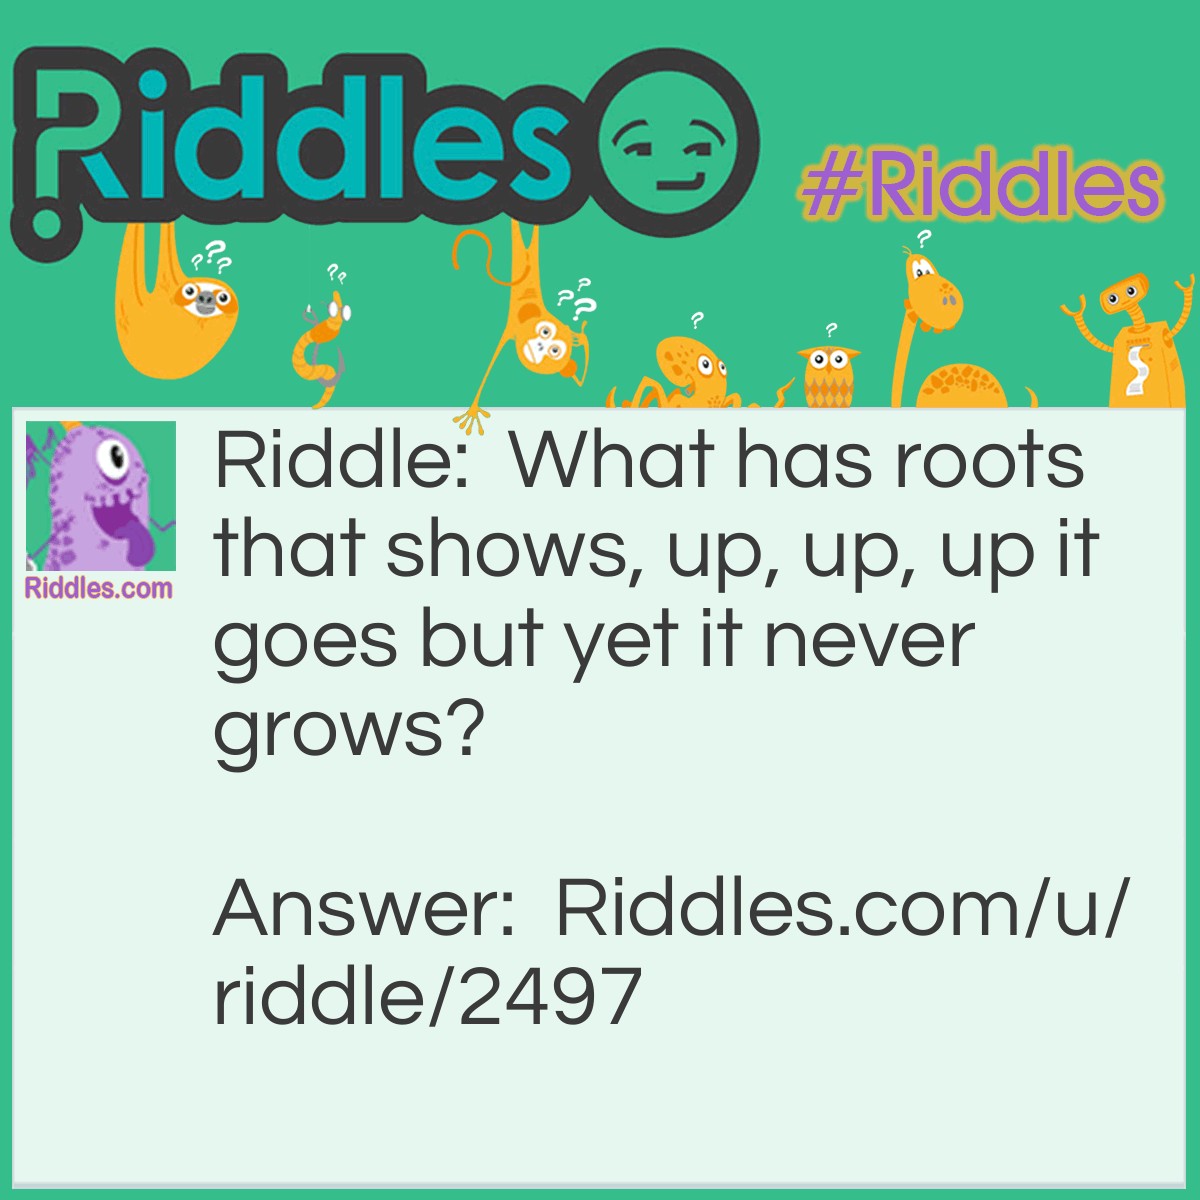 Riddle: What has roots that shows, up, up, up it goes but yet it never grows? Answer: A Mountain.